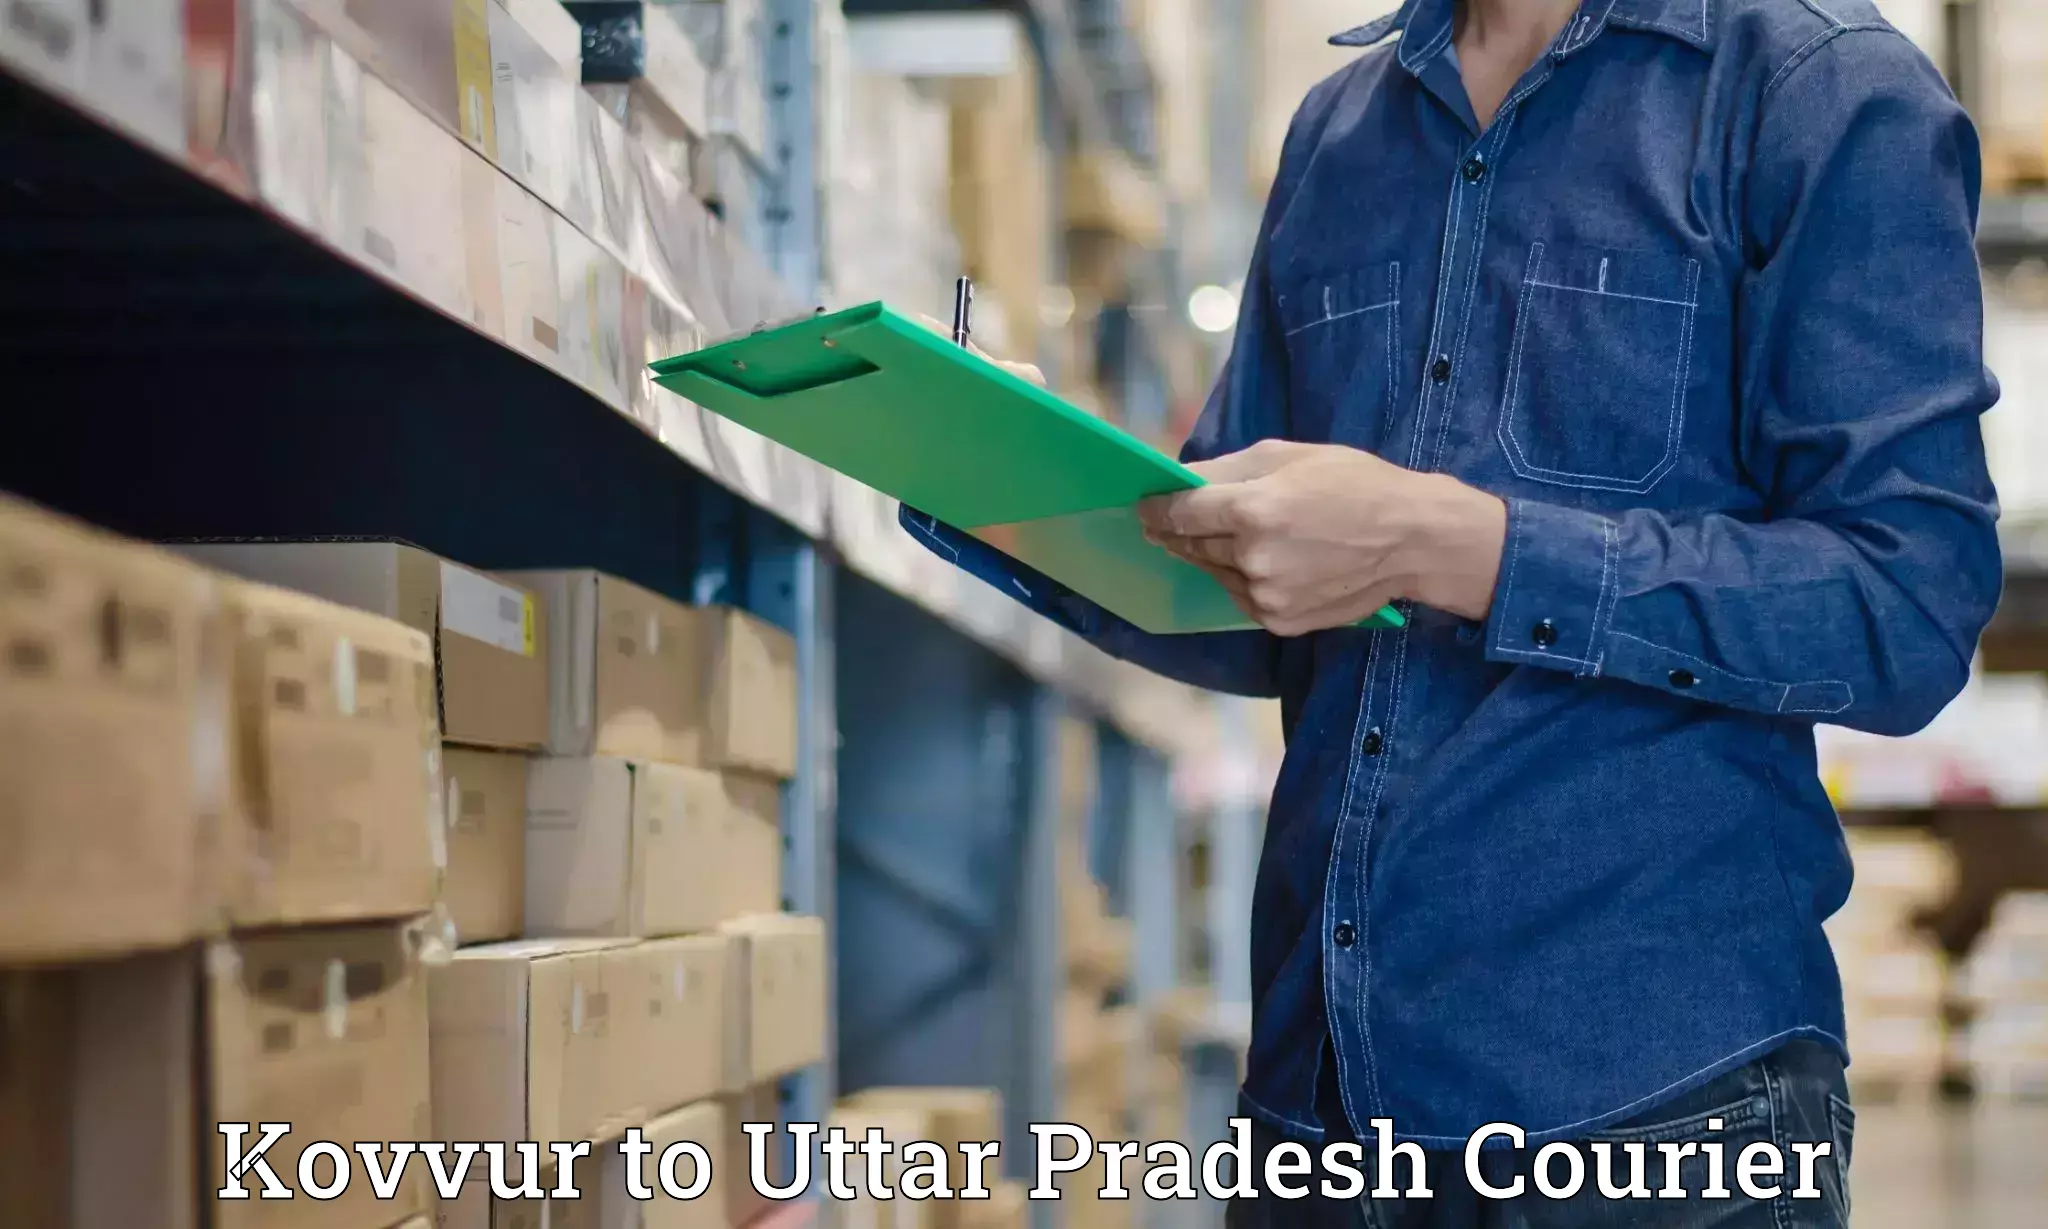 Specialized courier services Kovvur to Mathura